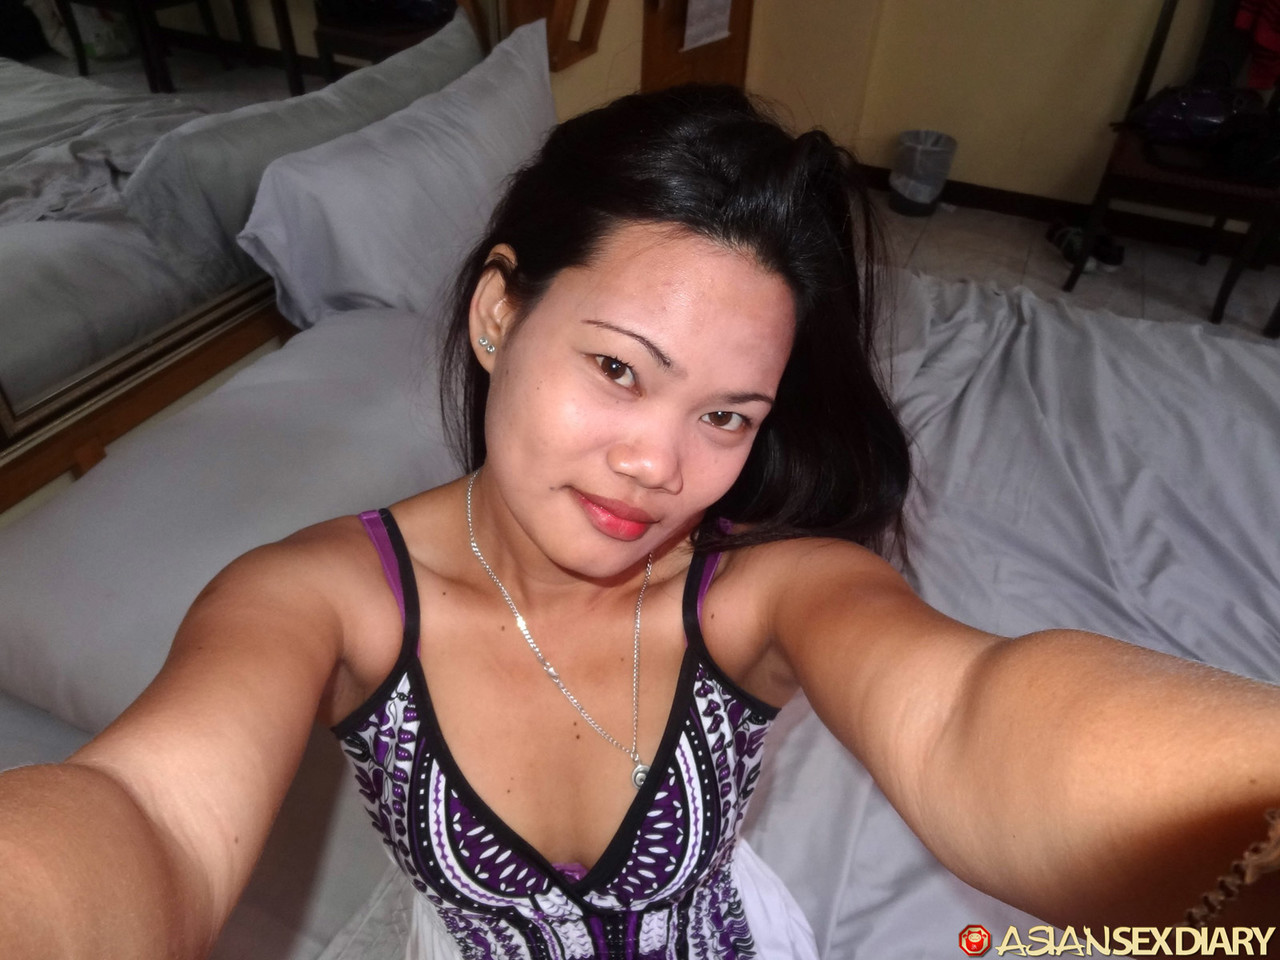 Asian amateurs Leann and Irish have sex on a bed with a foreigner порно фото #422834927 | Asian Sex Diary Pics, Leann, Irish, Creampie, мобильное порно